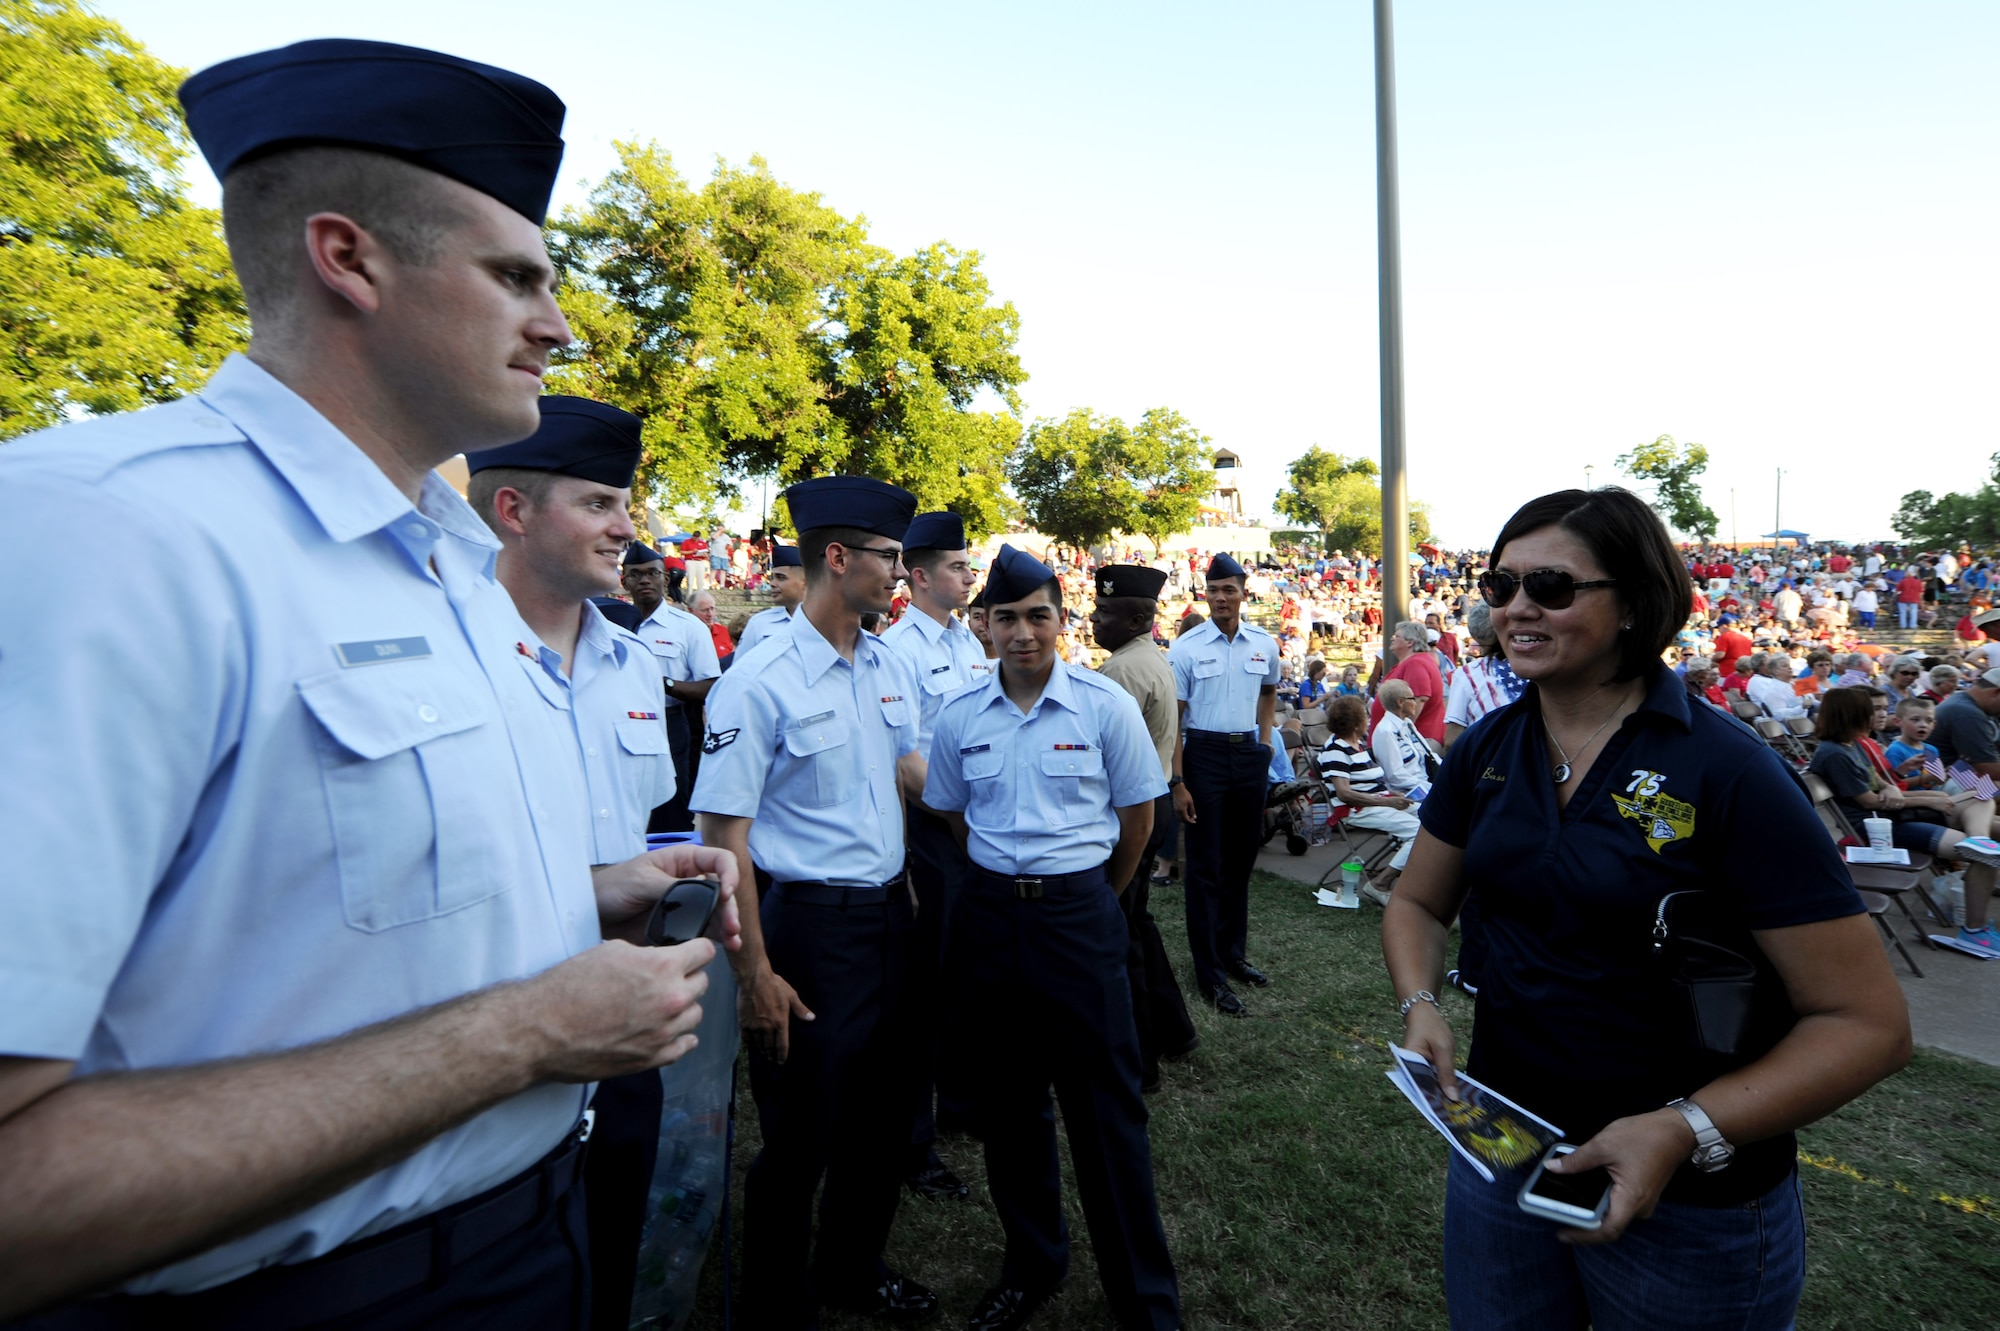 U.S. Air Force Chief Master Sgt. JoAnne Bass, 17th Training Wing Command Chief, speaks with volunteers at the 29th Annual San Angelo Symphony July 3rd Pops Concert at the Bill Aylor Sr. Memorial RiverStage in San Angelo, Texas, July 3, 2016. The volunteers assisted the concert by displaying state flags, presenting an American flag and providing a flyover. (U.S. Air Force photo by Senior Airman Joshua Edwards/Released)